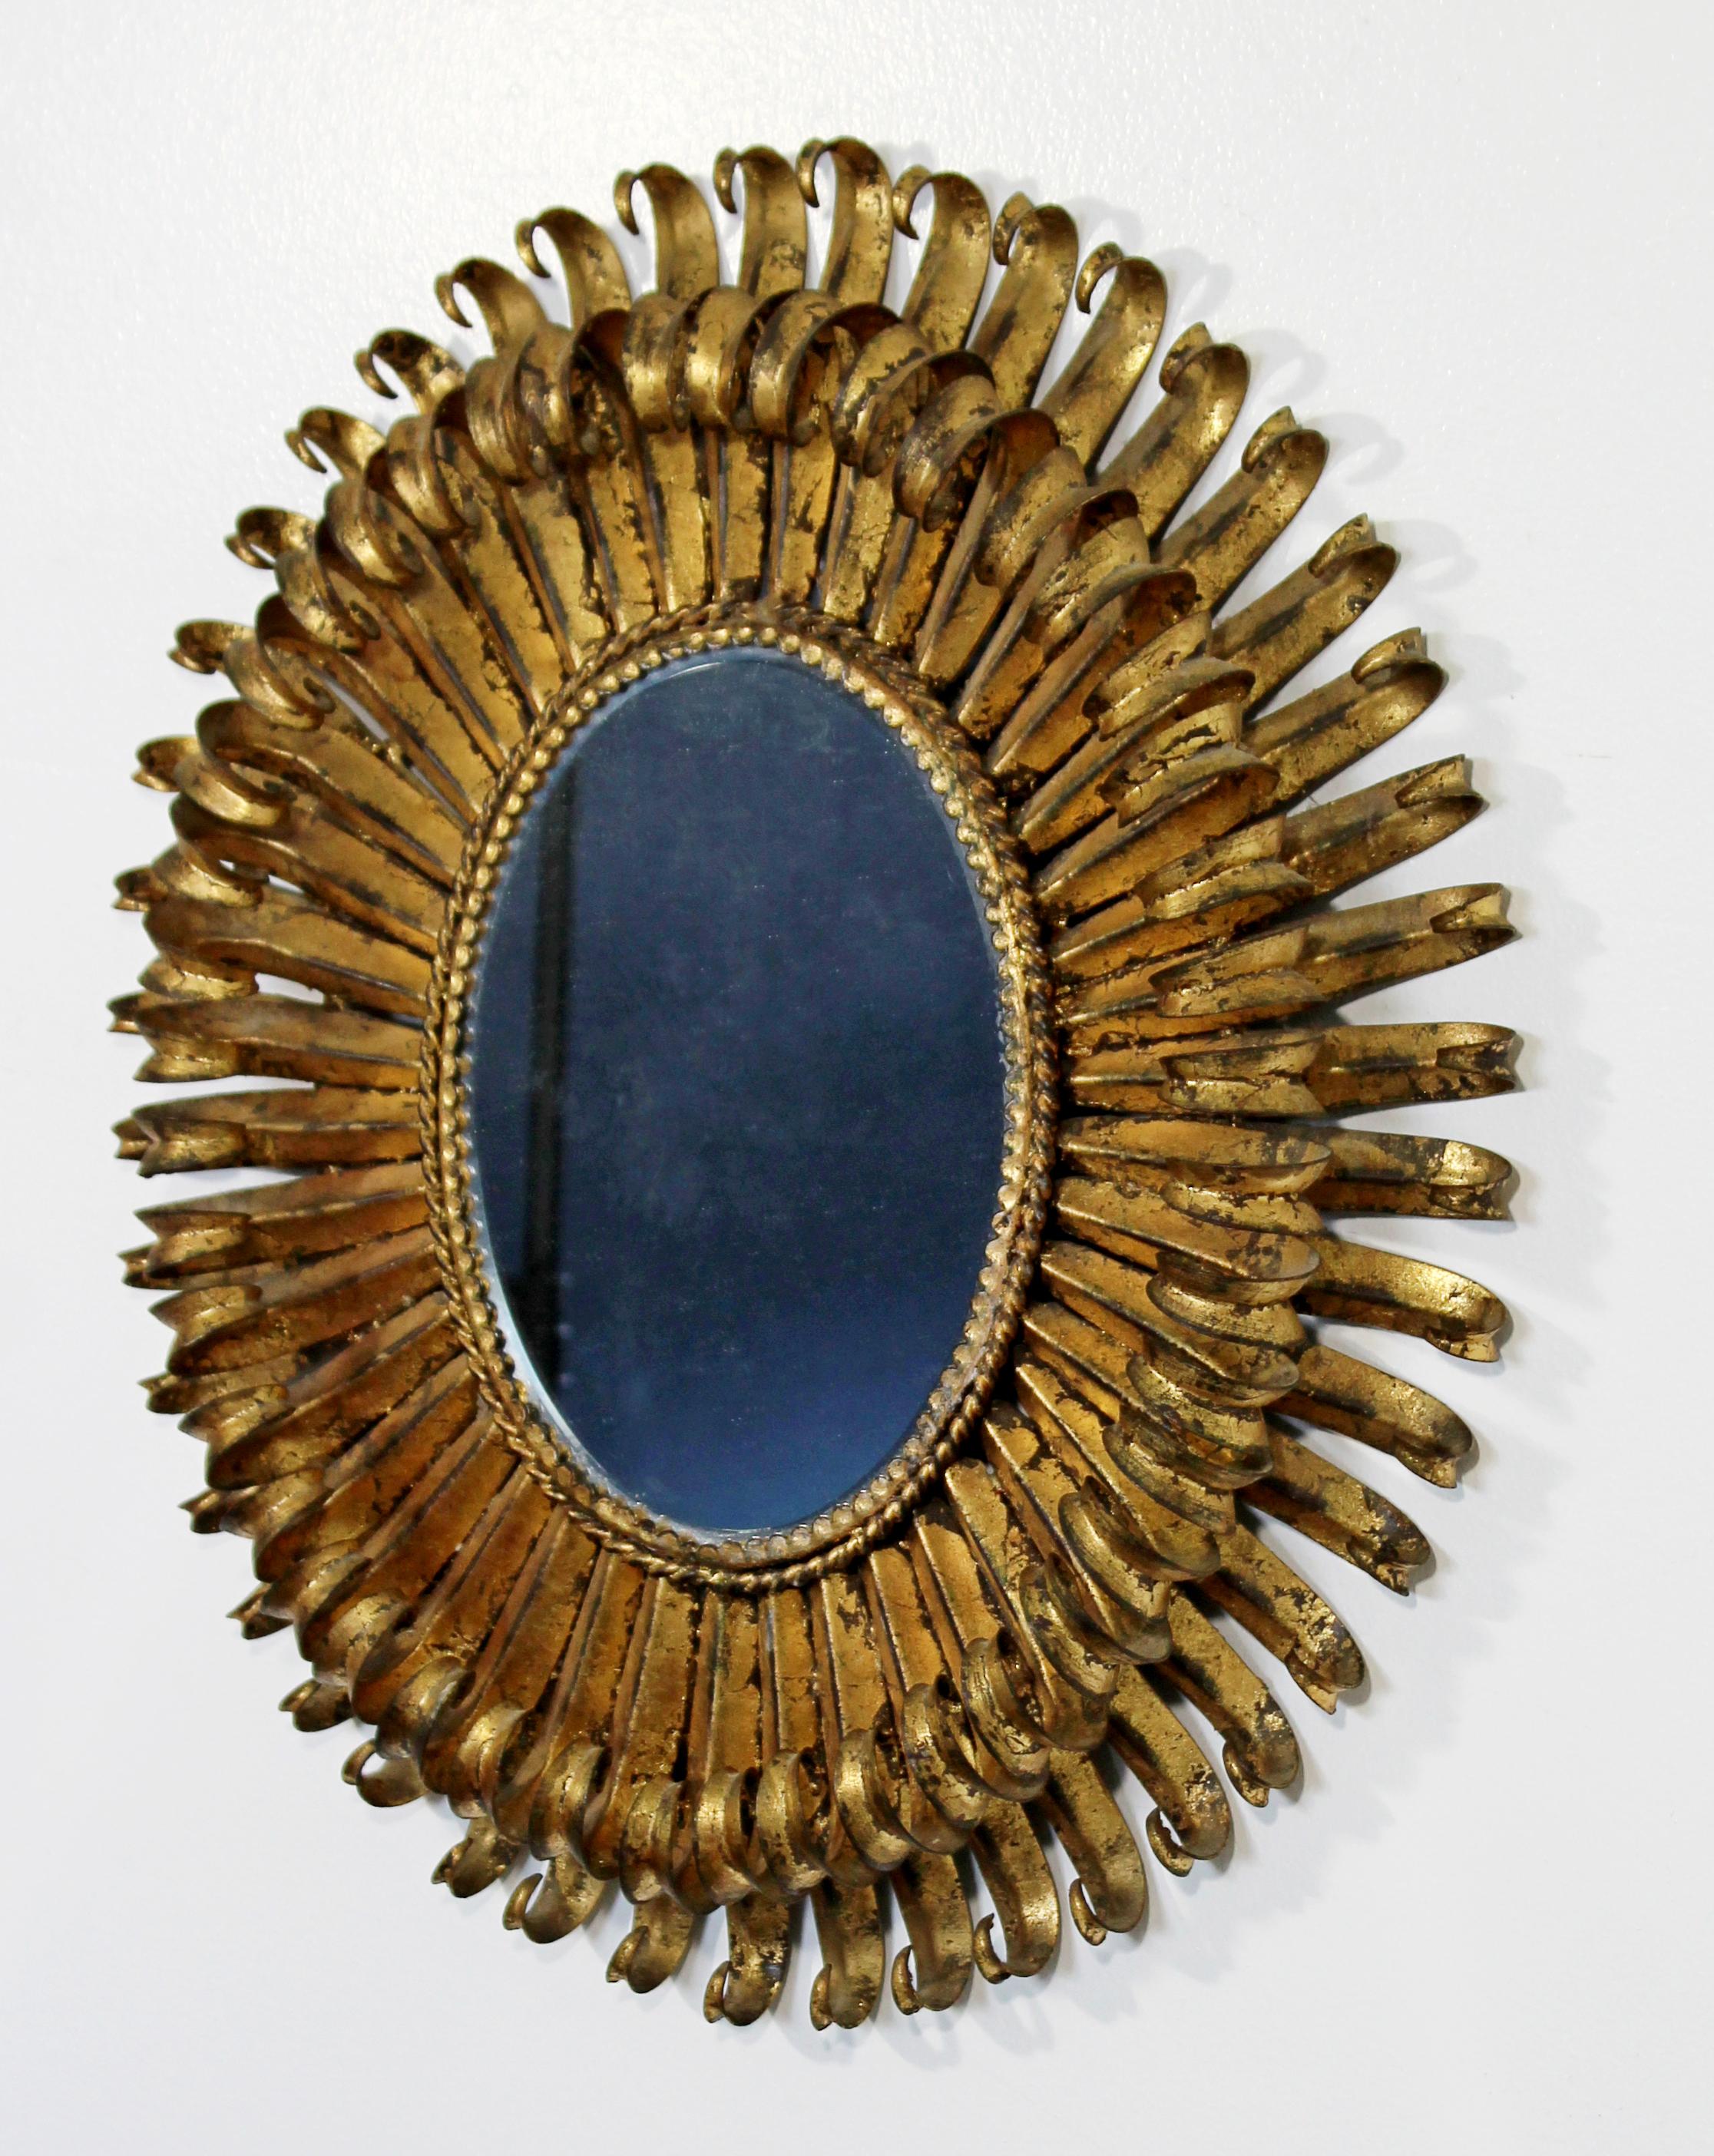 For your consideration is an incredible, gold gilt metal wall sculpture mirror, made in Italy, circa the 1960s. In excellent vintage condition. The dimensions are 17